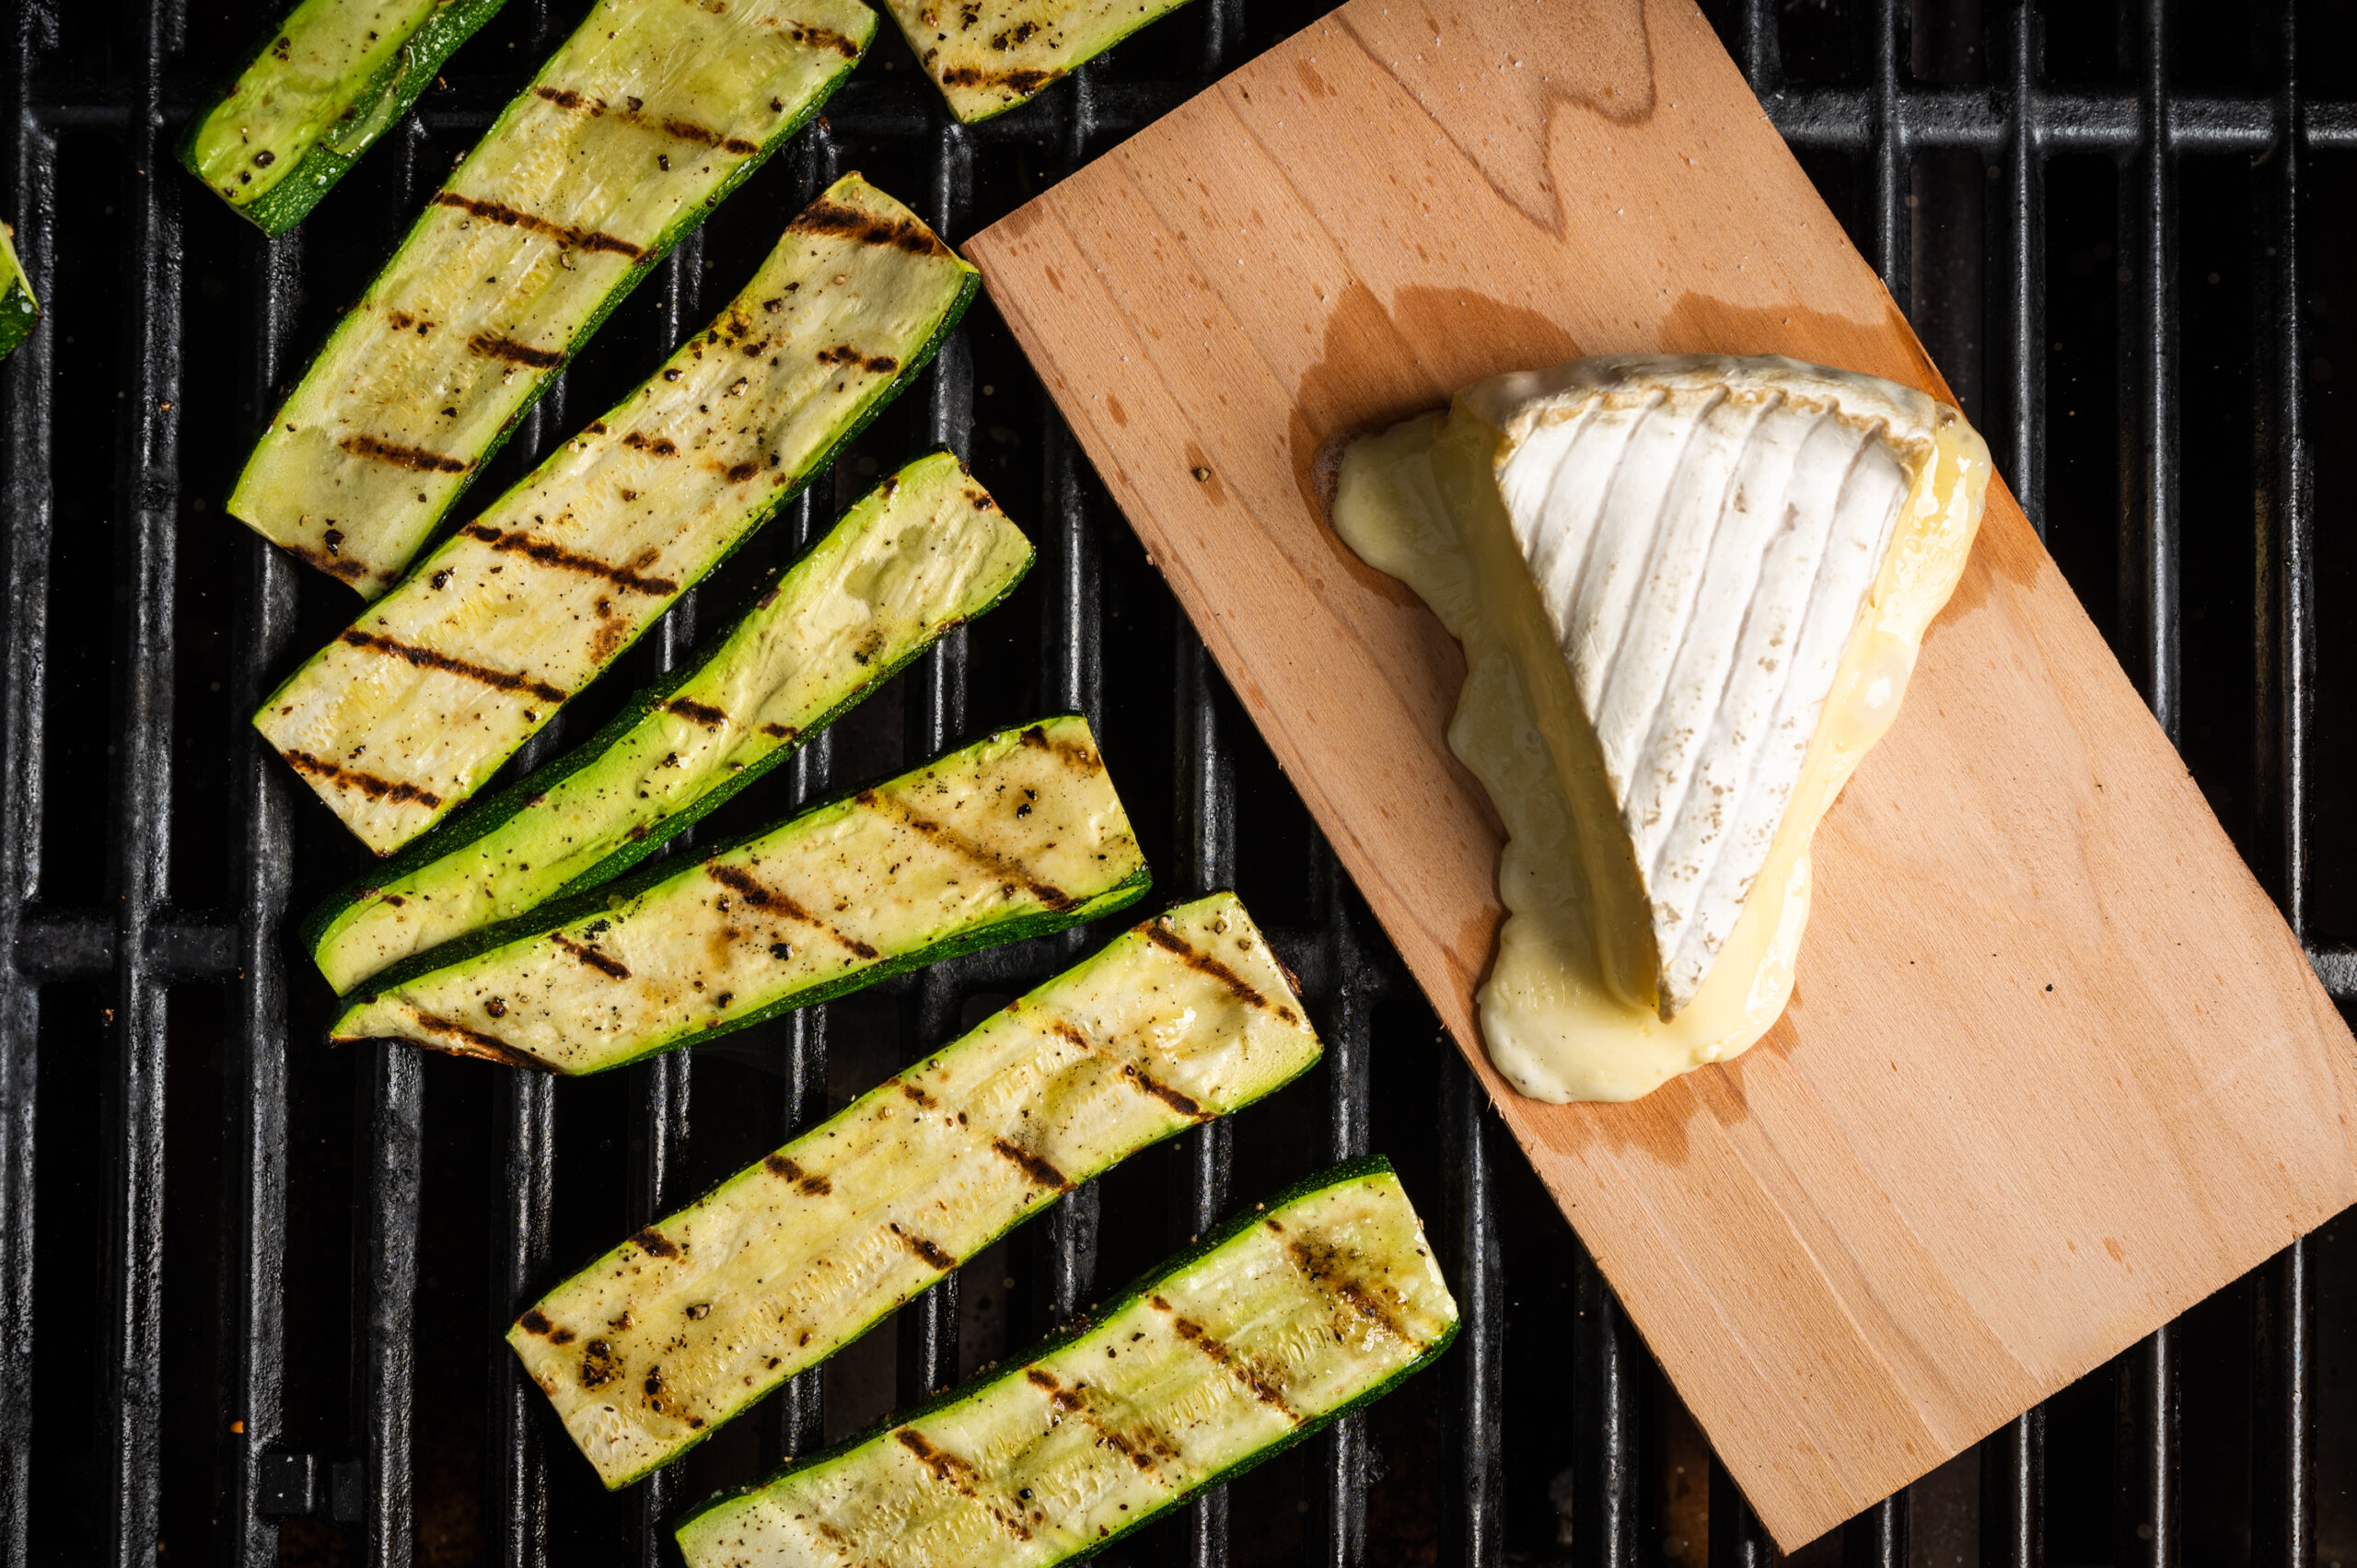 Zucchini on the grill with cedar-plank brie.